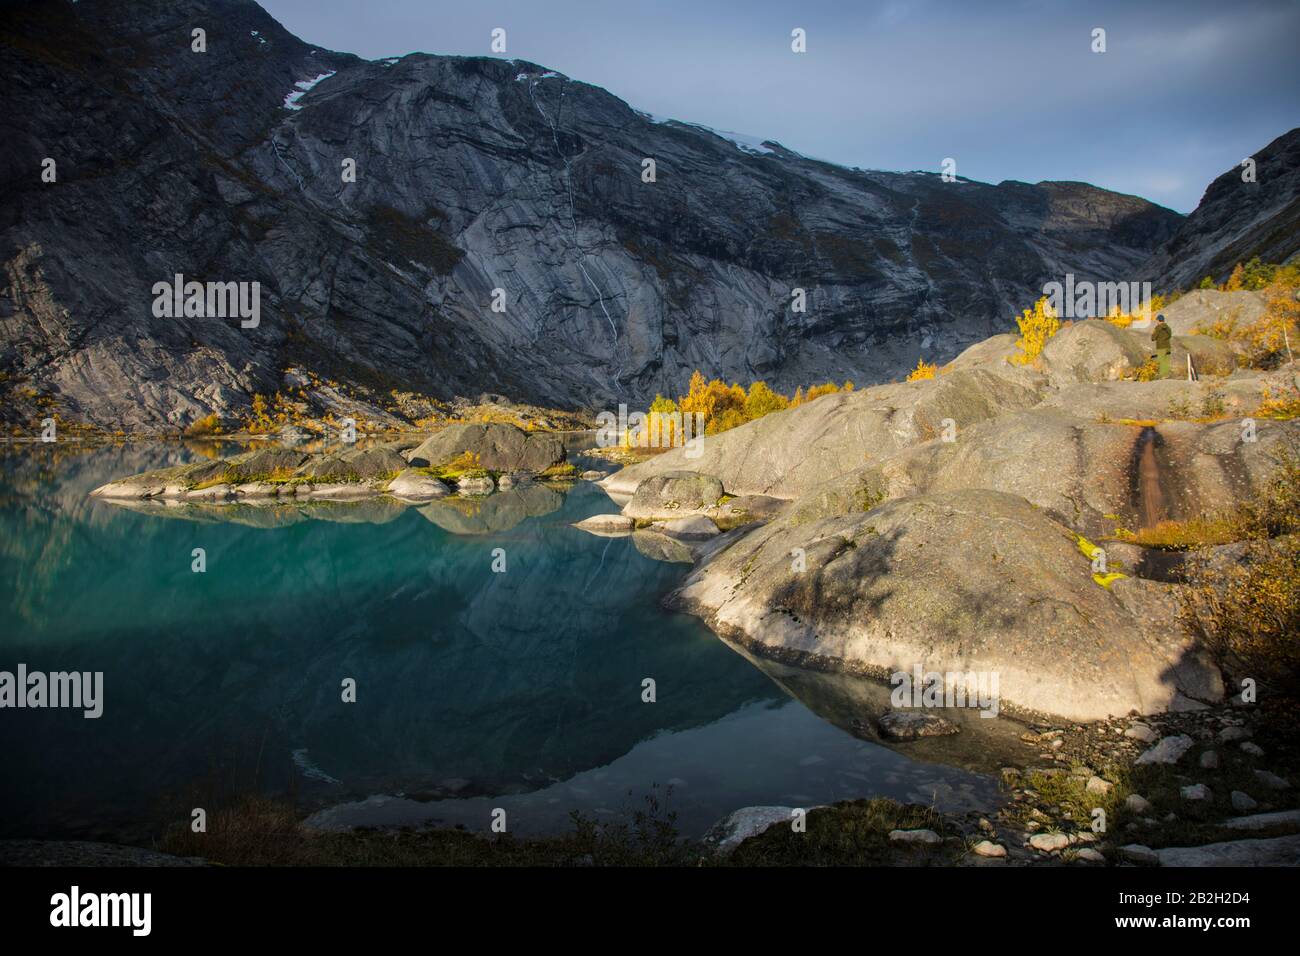 Glacier reflect in melting water in Norway Stock Photo